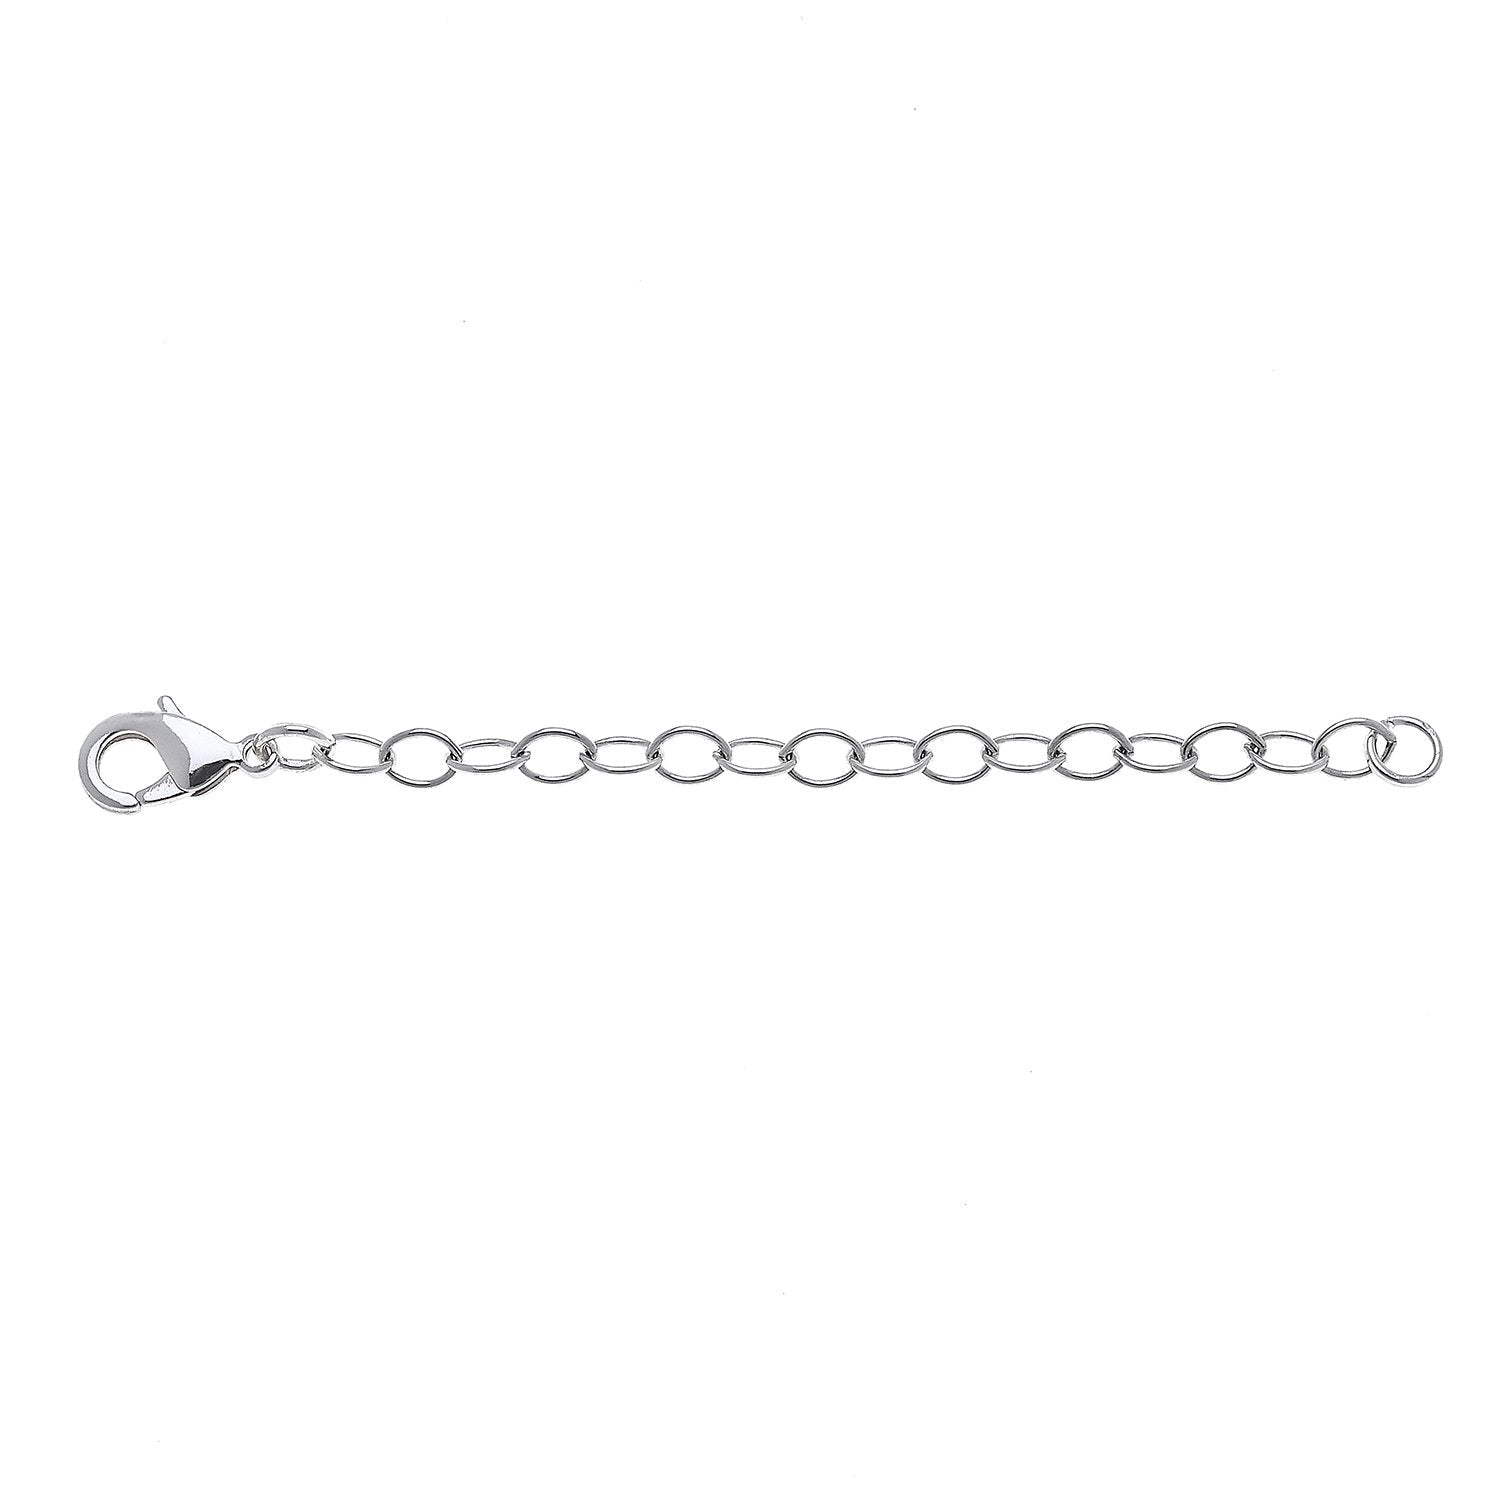 SILVER NECKLACE EXTENDER